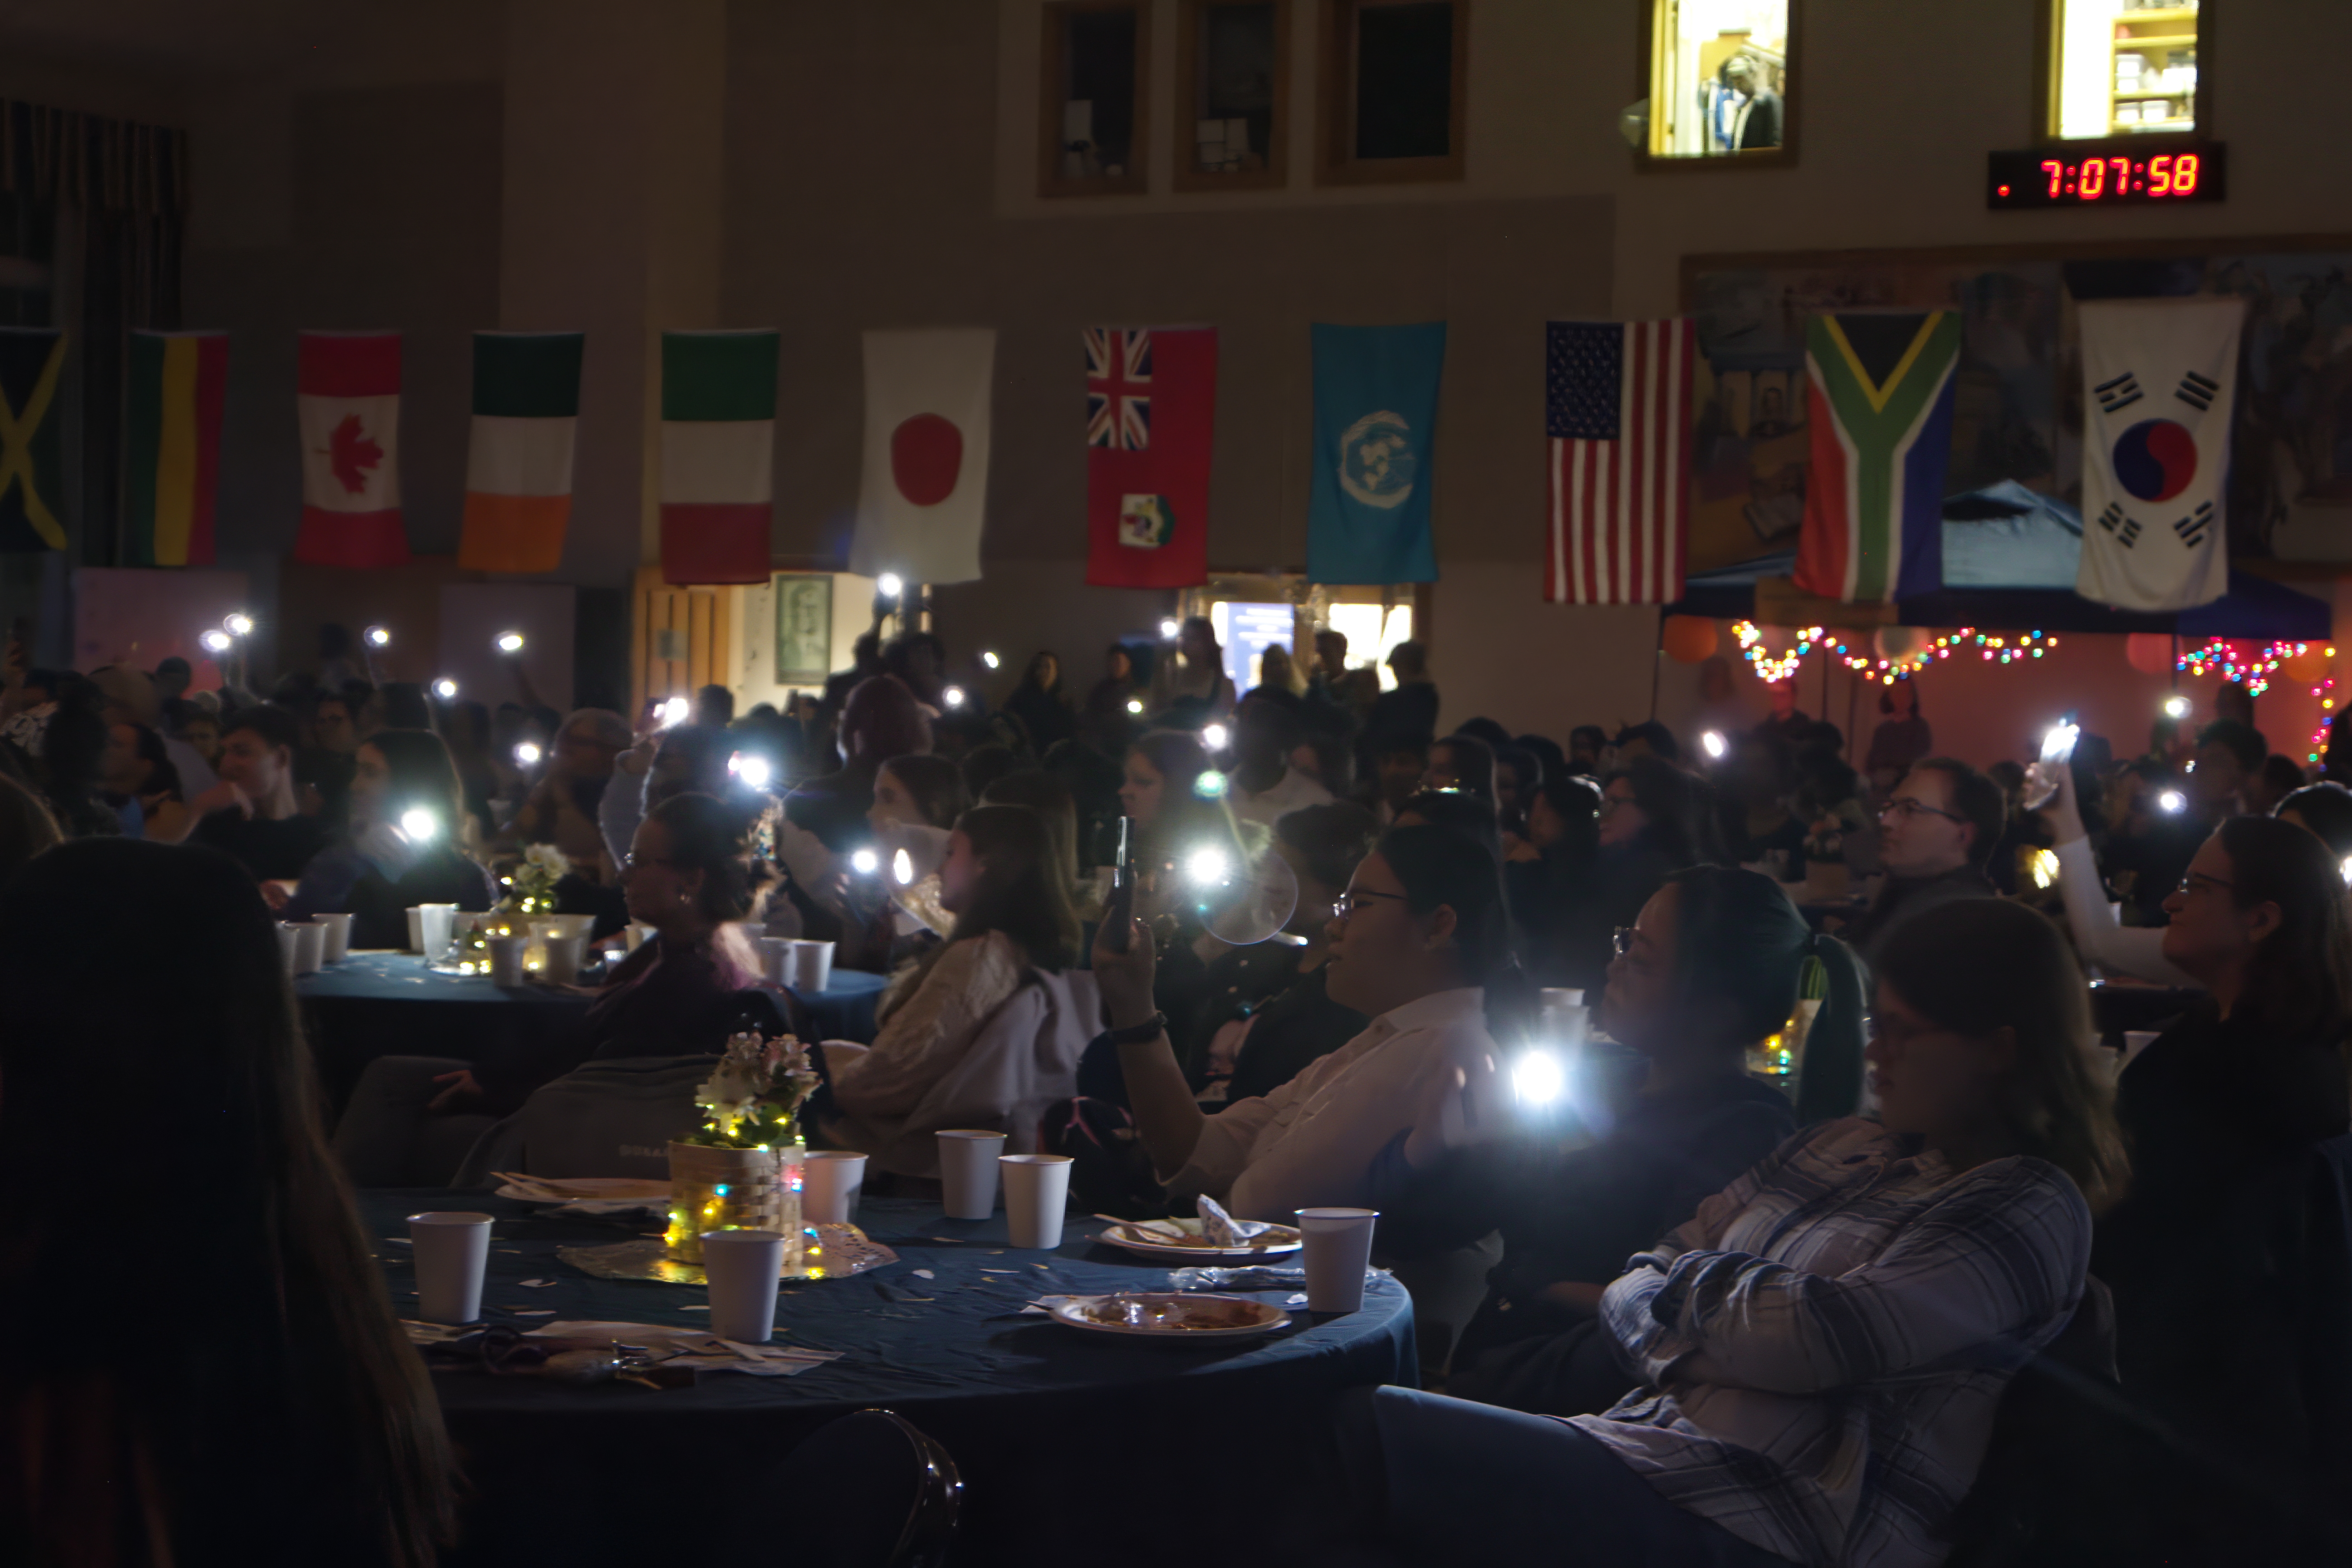 Audience members shining their cell phone lights during a performance. (Photo Abror Niyazmetov/The Gettysburgian)